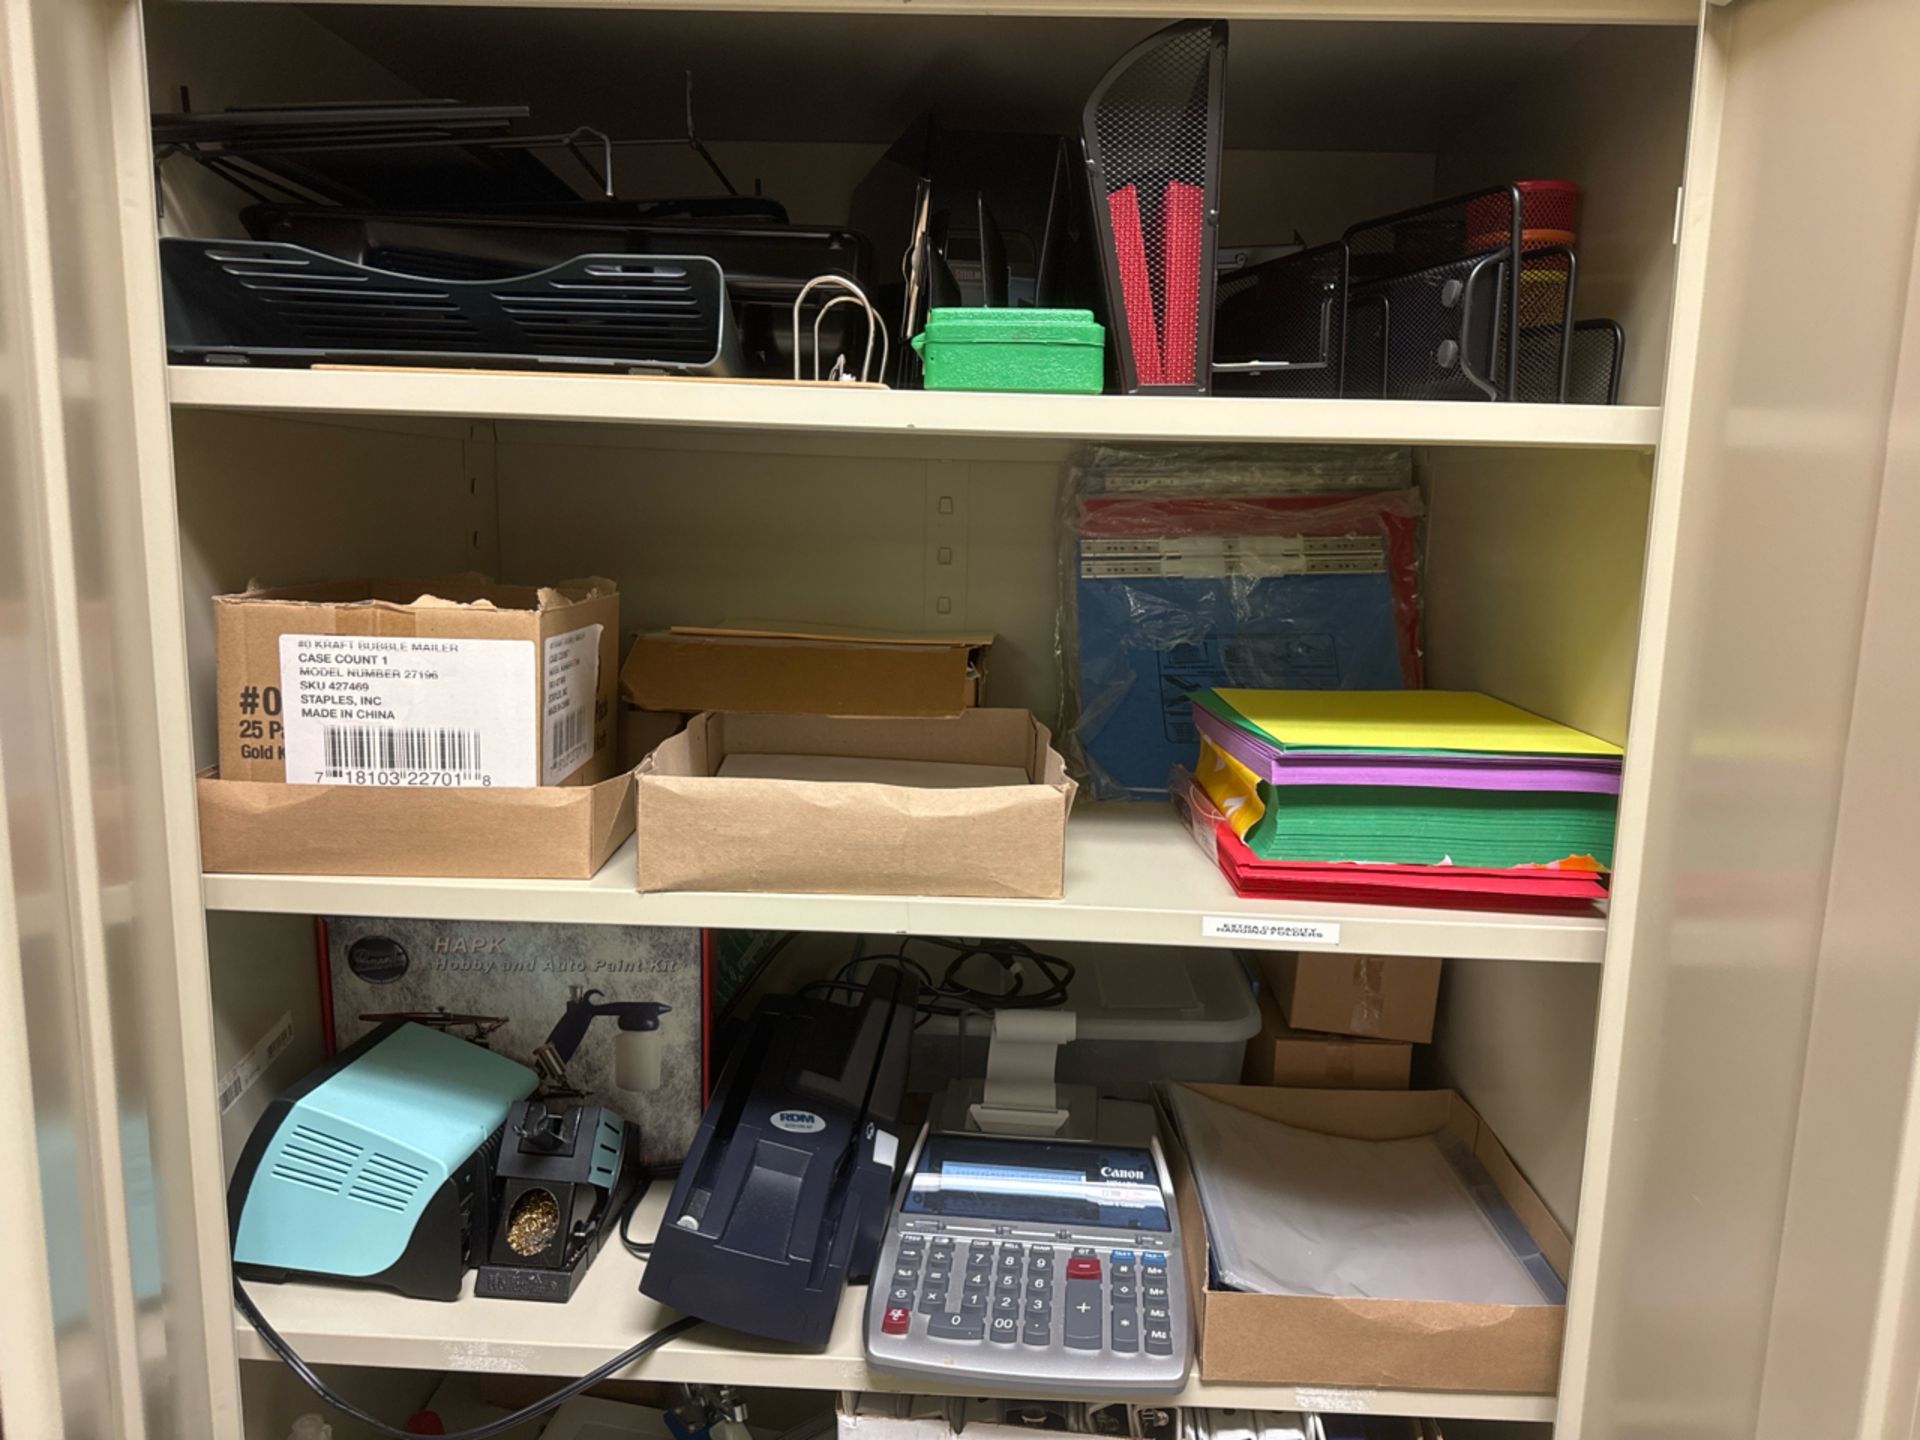 Contents Of Storage Room - Image 16 of 19